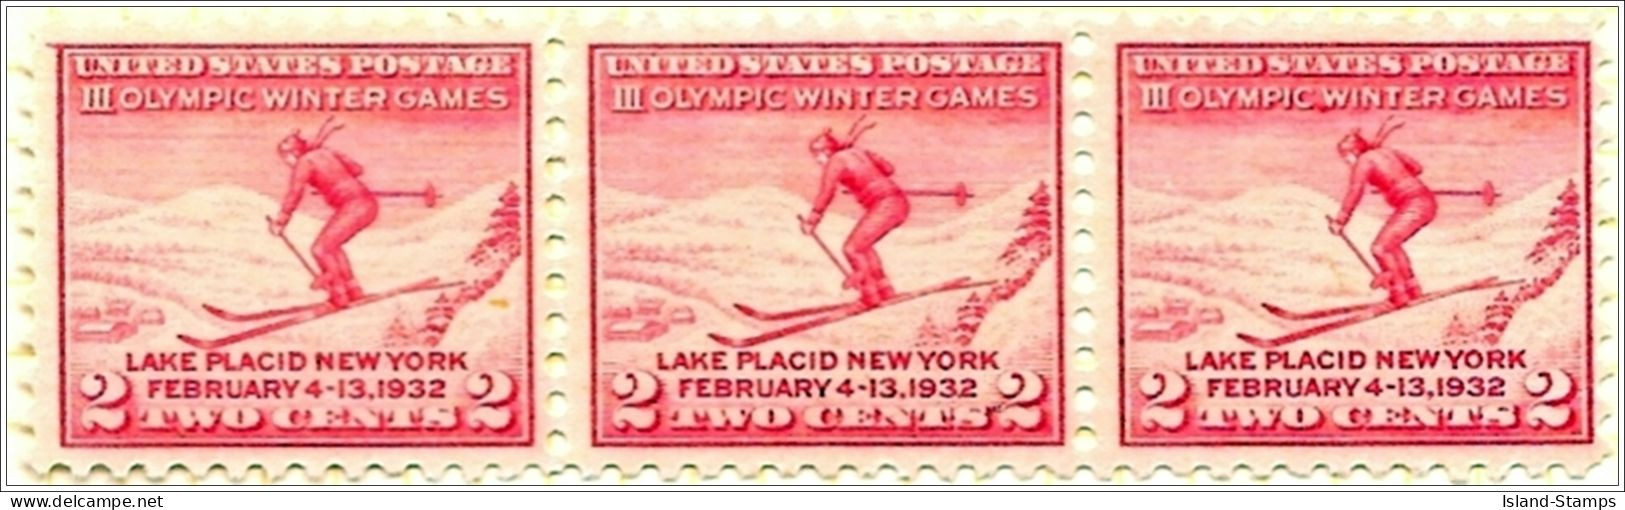 USA # 716 - 1932 2c Third Olympic Winter Games Mounted Mint Strip Of 3 + Single Used - Unused Stamps